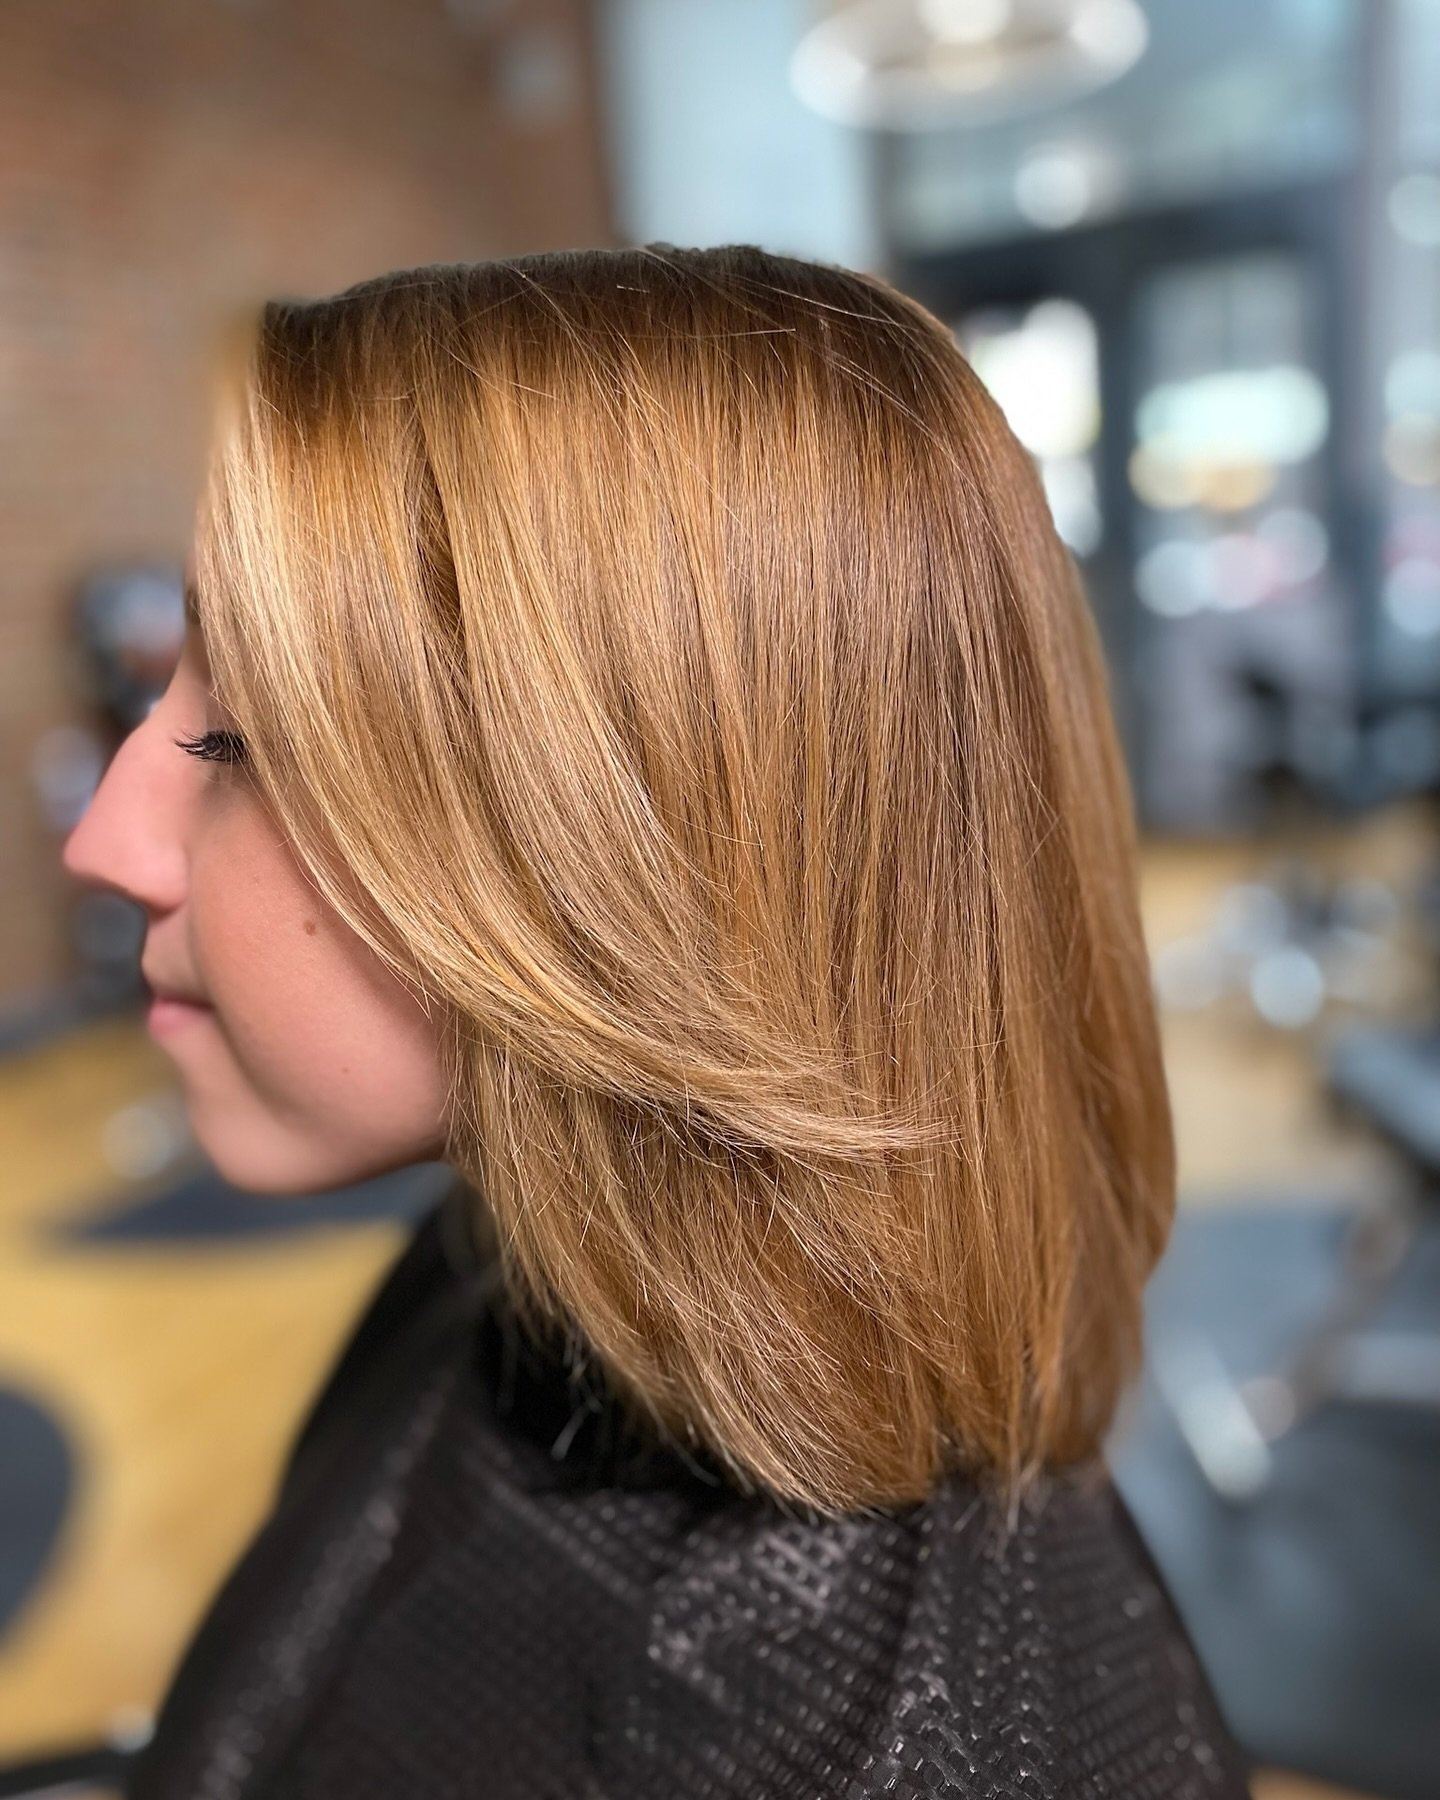 It&rsquo;s giving cookie butter. 🥠🧈🥐🥞 

Hair by @rybehindthechair. 

#hairstylist #haircut #blondehair #denversalon #evergreensalon #womenshaircuts #womenshairstyles